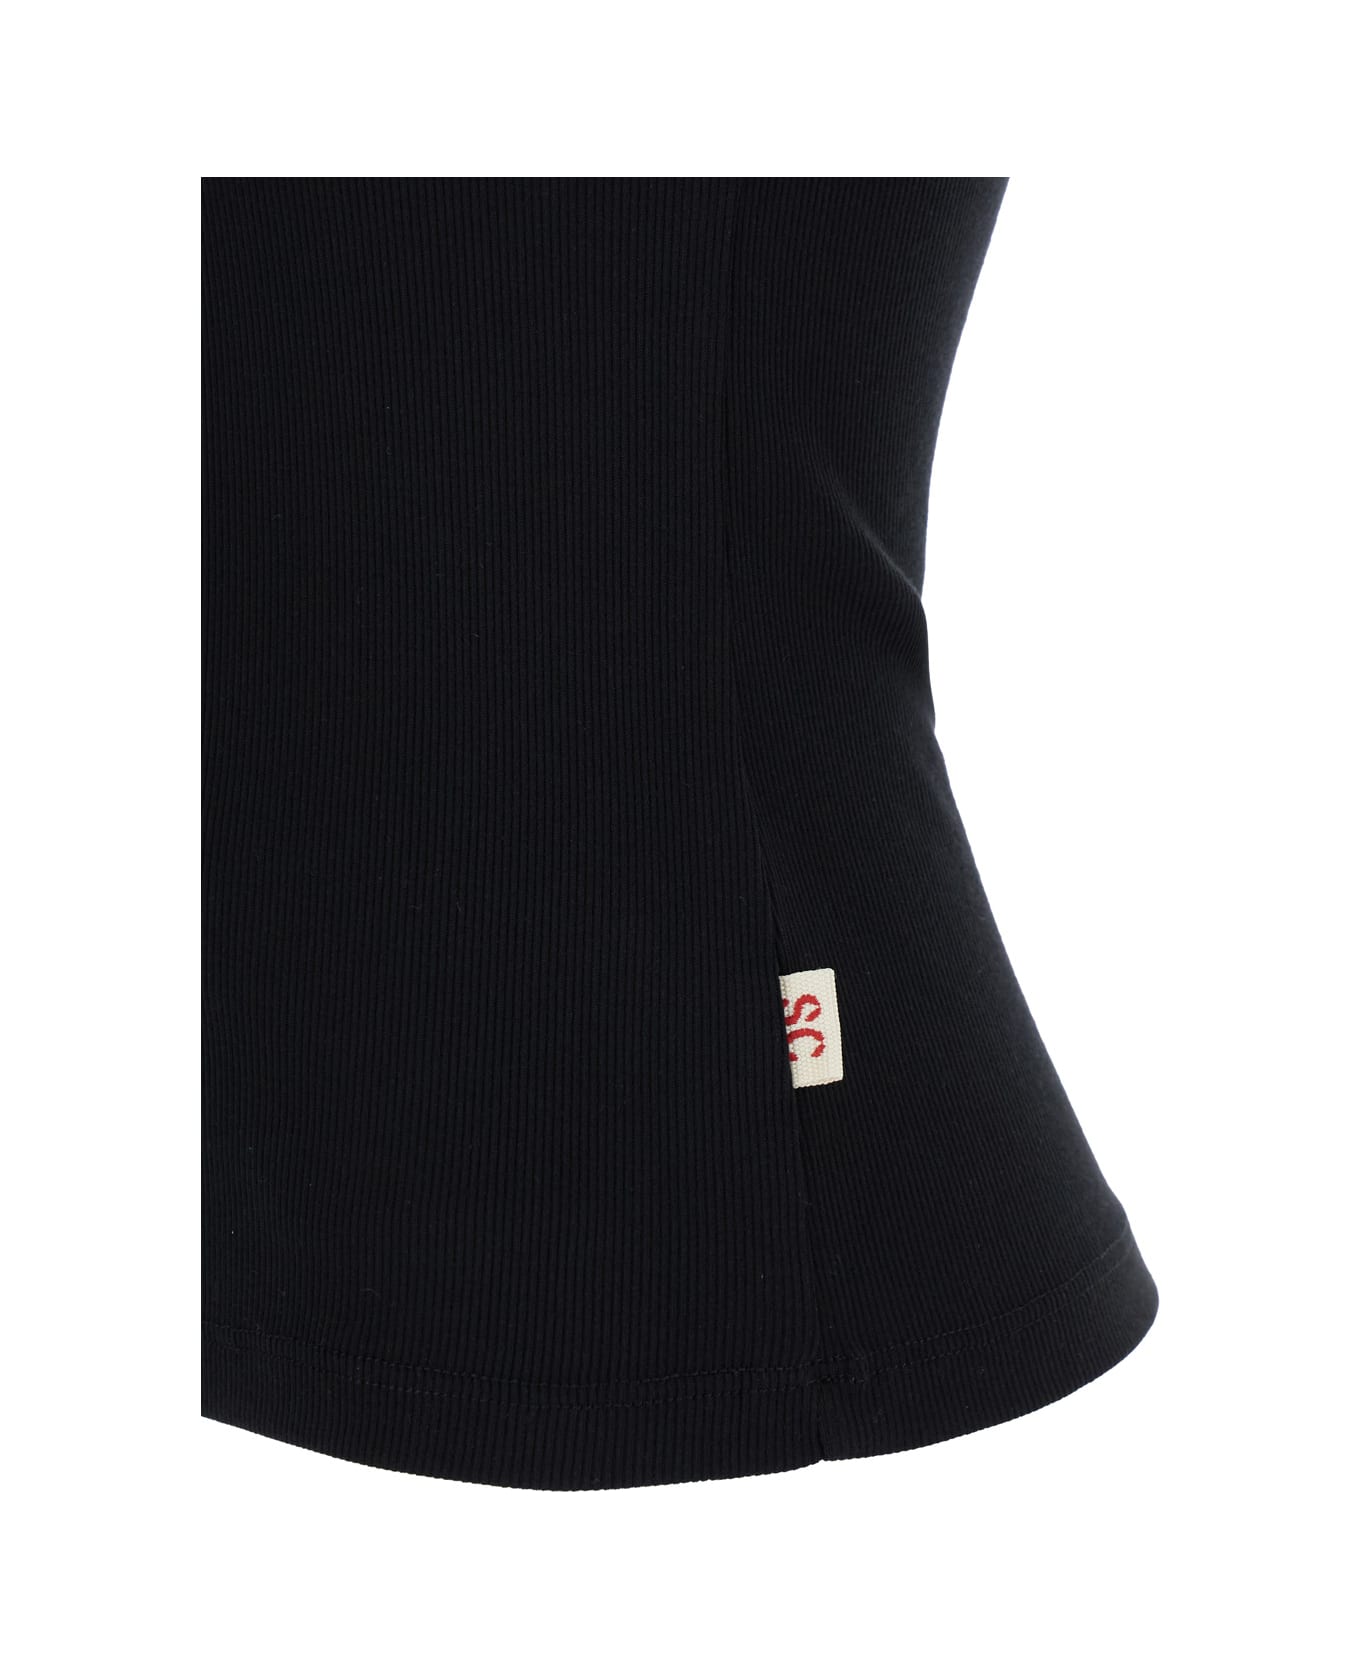 SEMICOUTURE Black Ribbed Tank Top With U Neckline In Cotton And Modal Blend Woman - Black